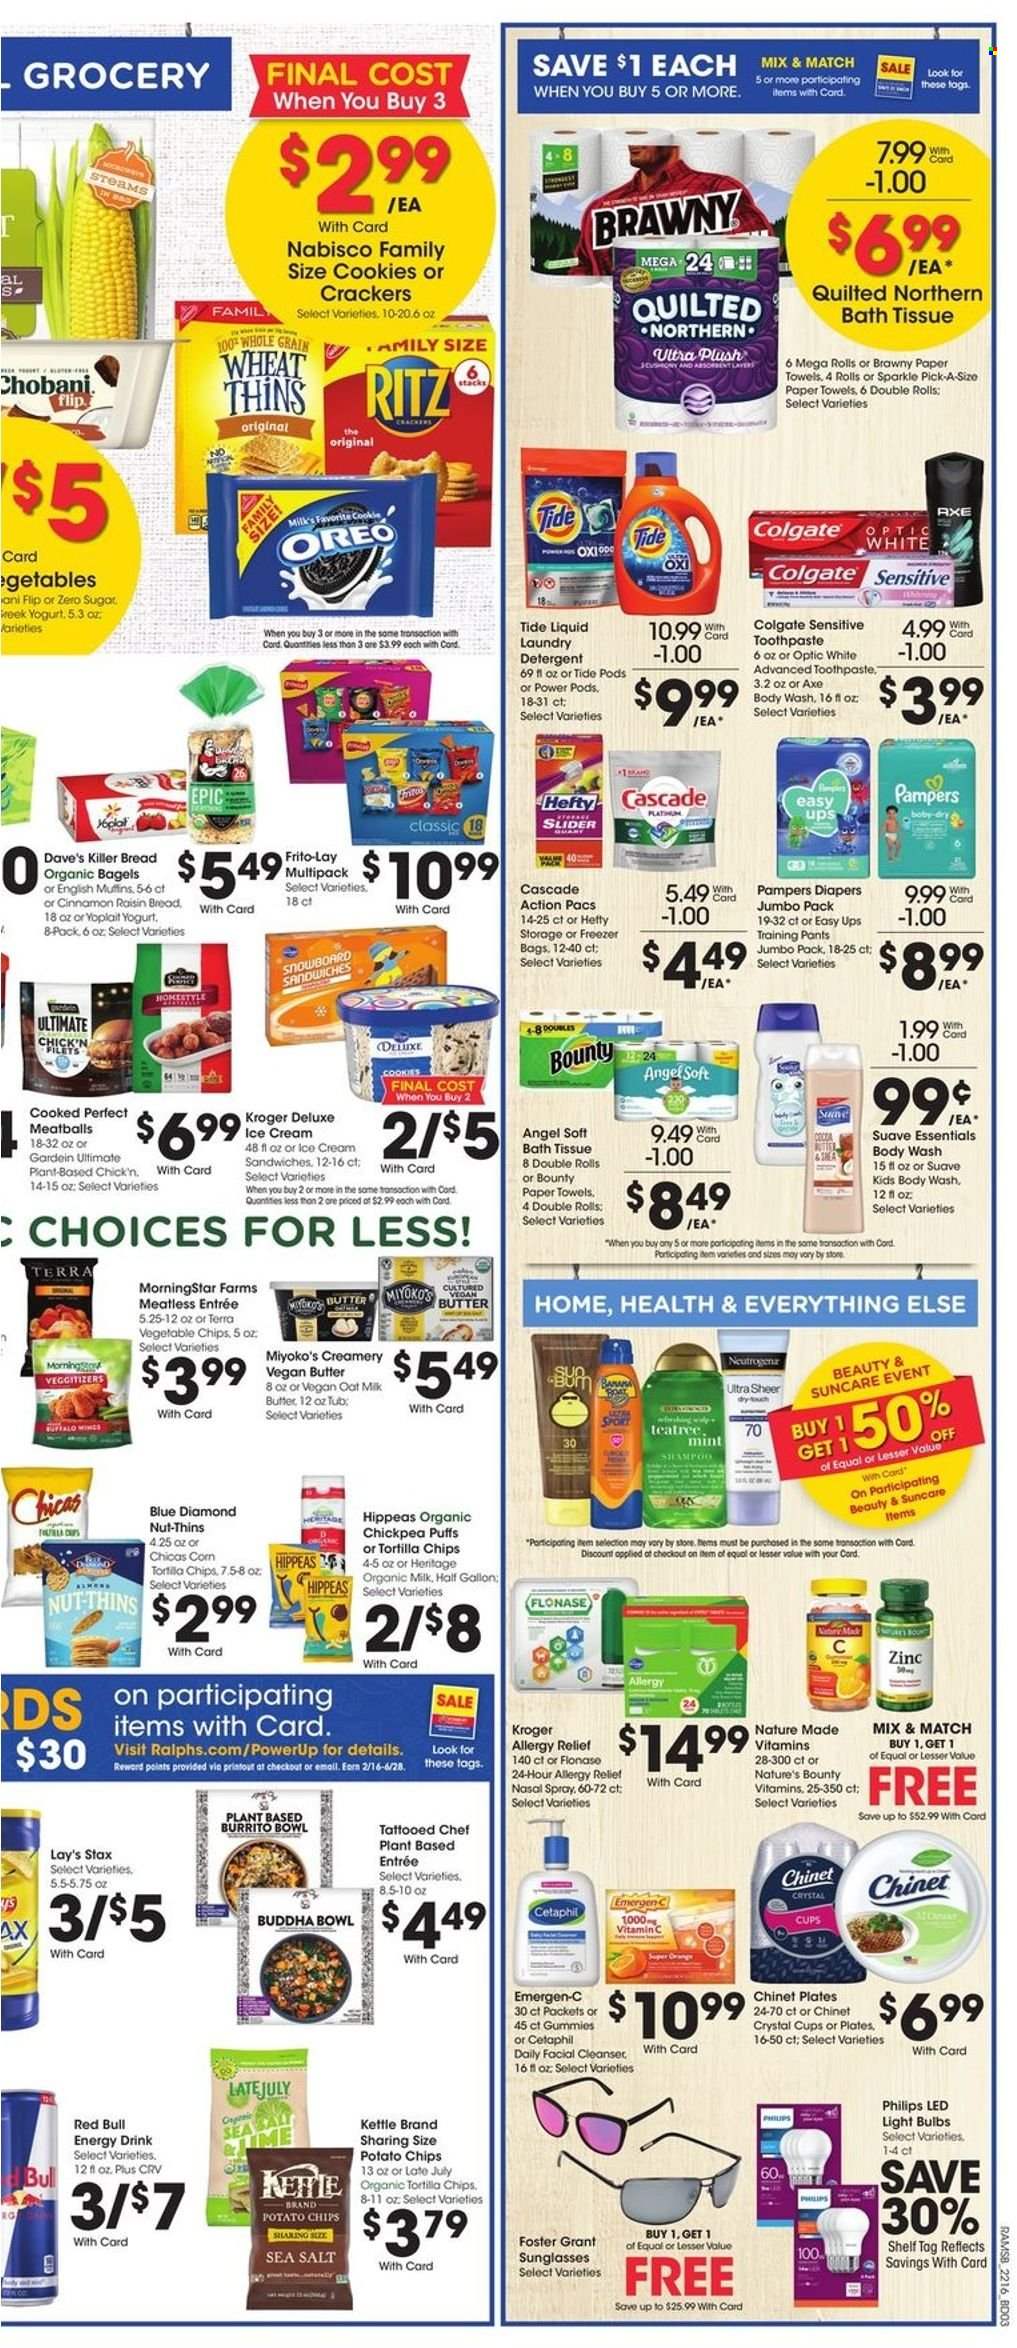 thumbnail - Ralphs Flyer - 05/18/2022 - 05/24/2022 - Sales products - bagels, puffs, corn, oranges, meatballs, burrito, MorningStar Farms, Oreo, yoghurt, Yoplait, Chobani, organic milk, butter, ice cream, ice cream sandwich, cookies, crackers, RITZ, tortilla chips, potato chips, chips, Lay’s, Thins, vegetable chips, Frito-Lay, oats, Blue Diamond, energy drink, Red Bull, Pampers, pants, nappies, baby pants, bath tissue, Quilted Northern, kitchen towels, paper towels, detergent, Cascade, Tide, laundry detergent, body wash, shampoo, Suave, Colgate, toothpaste, cleanser, Axe, Hefty, bowl, bulb, light bulb, Philips, sunglasses, LED light, Nature Made, Nature's Bounty, vitamin c, zinc, Emergen-C, nasal spray, allergy relief. Page 6.